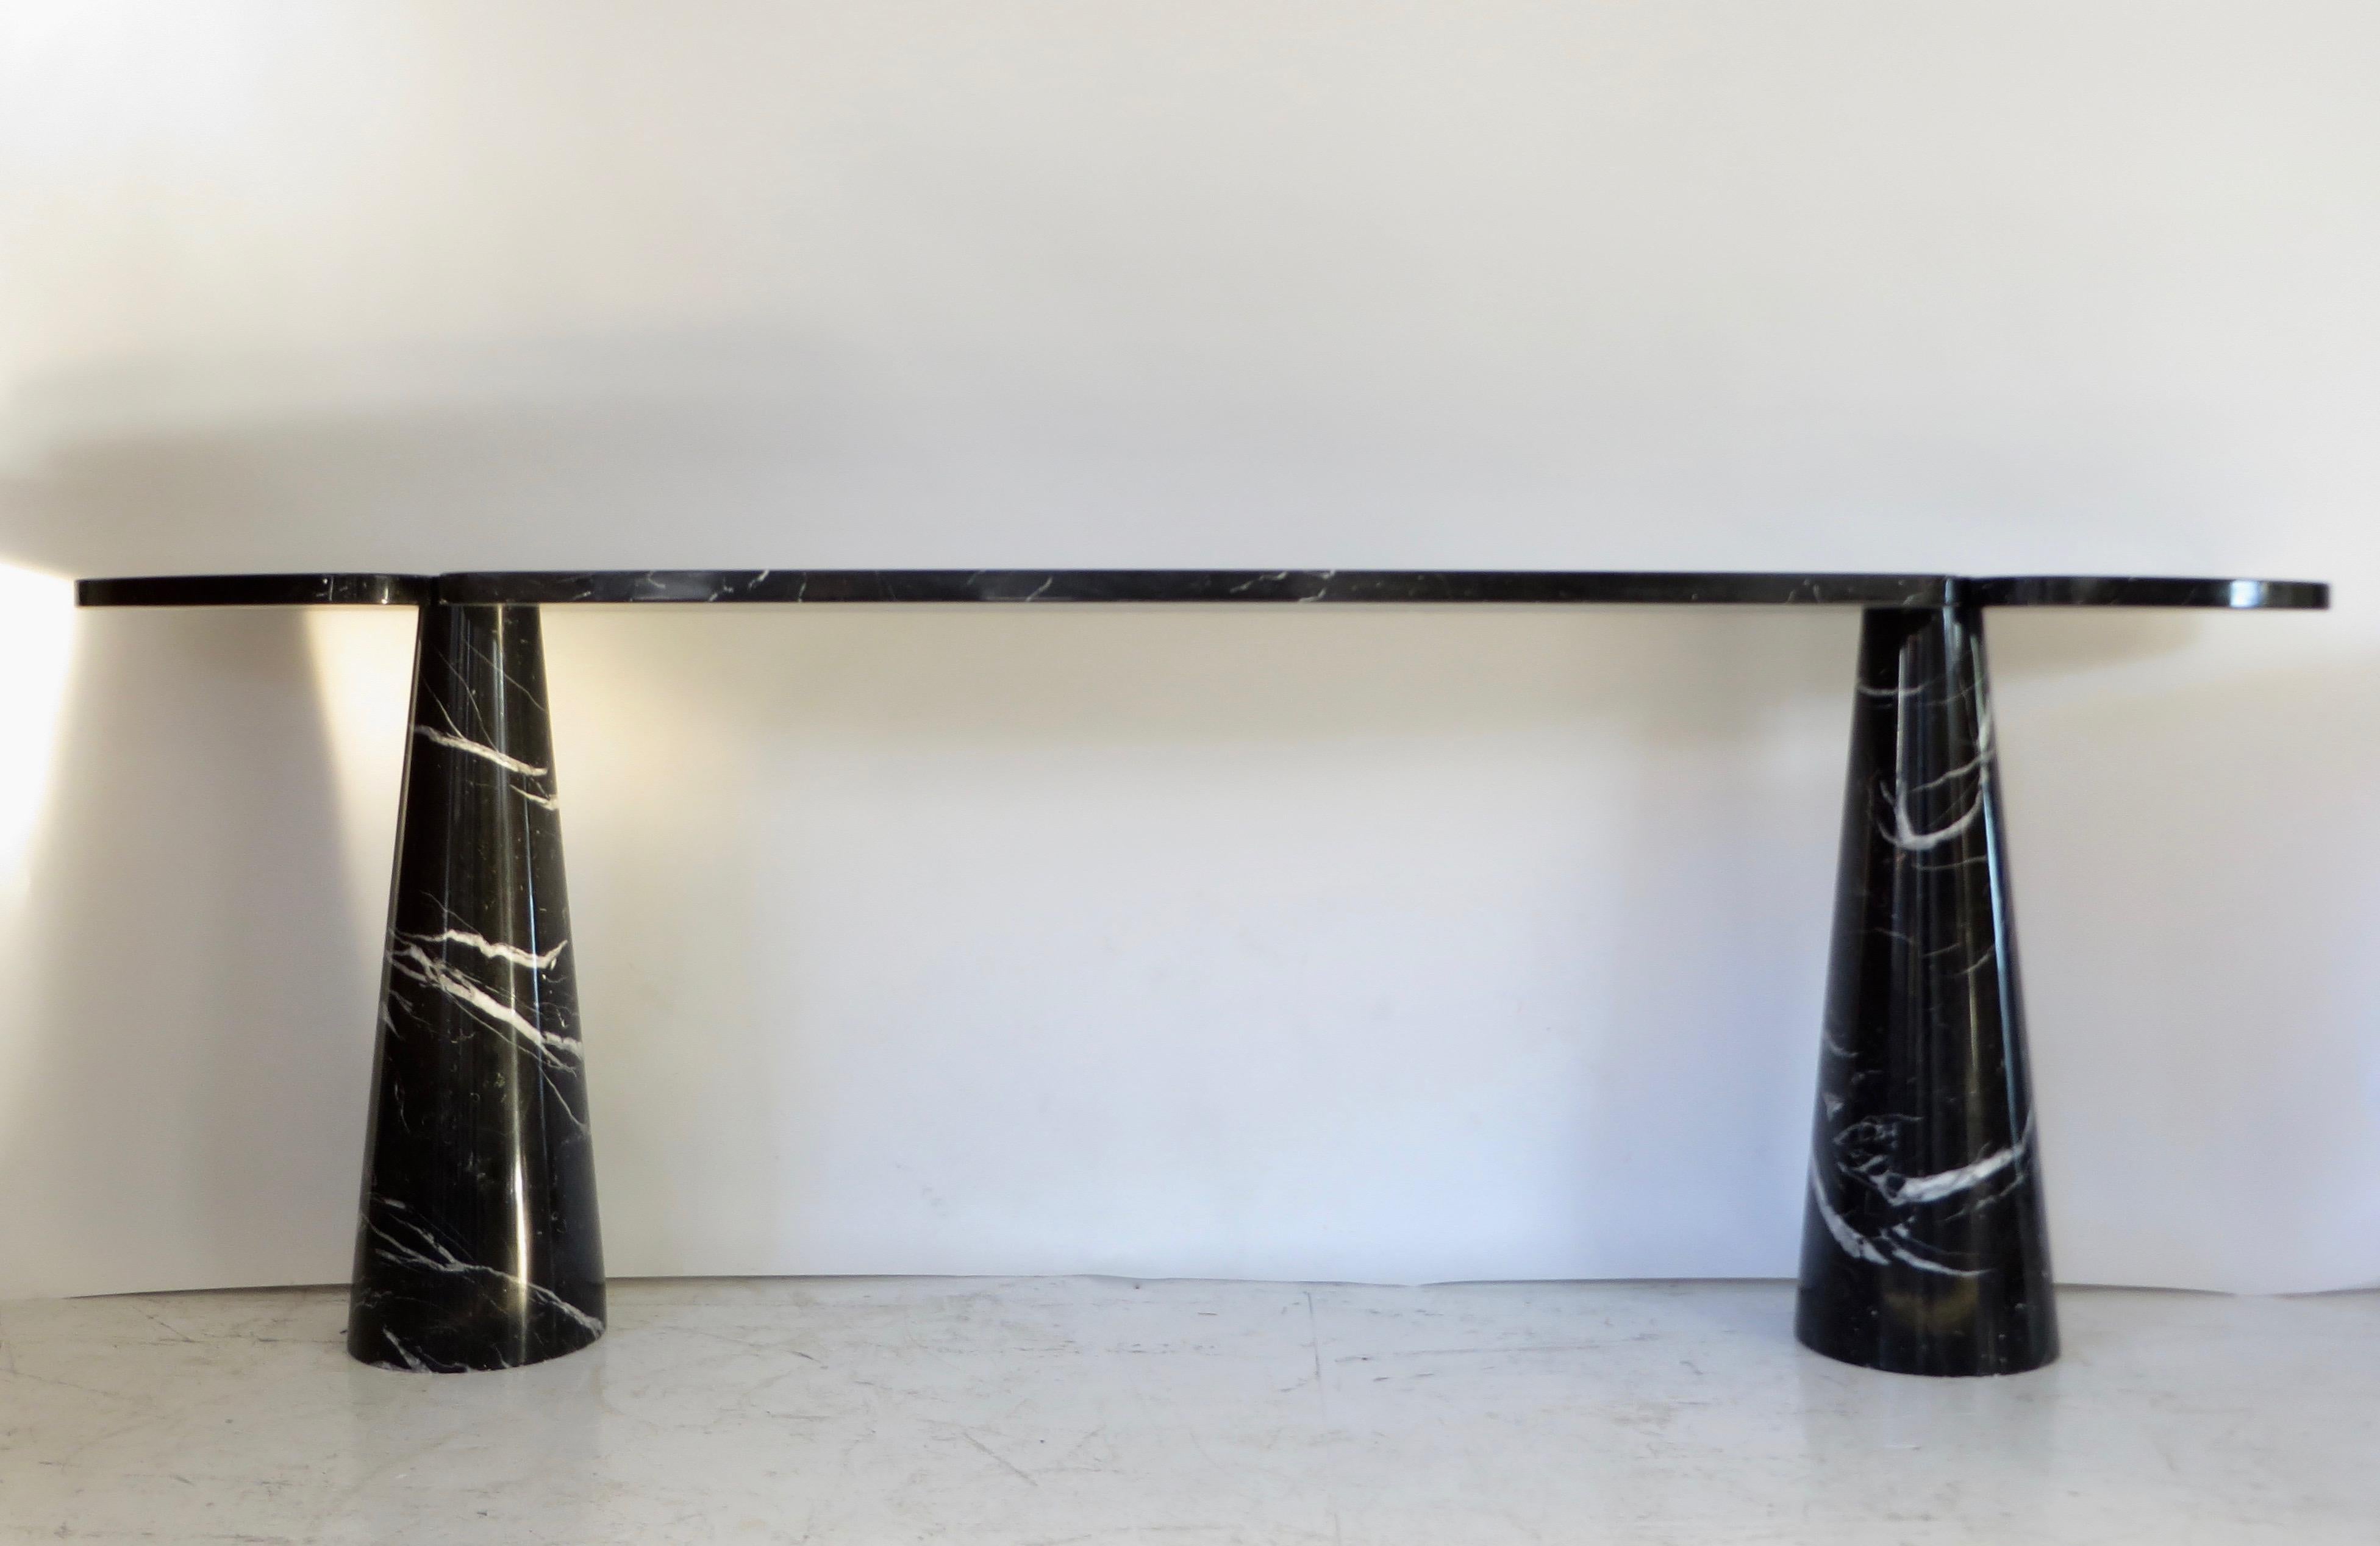 Angelo Mangiarotti vintage iconic Italian console Eros collection for Skipper, circa 1971.
This console is extra long.
The black or Nero Marquina marble is nicely veined.
The top sits on the conical legs in the iconic Mangiarotti finely designed